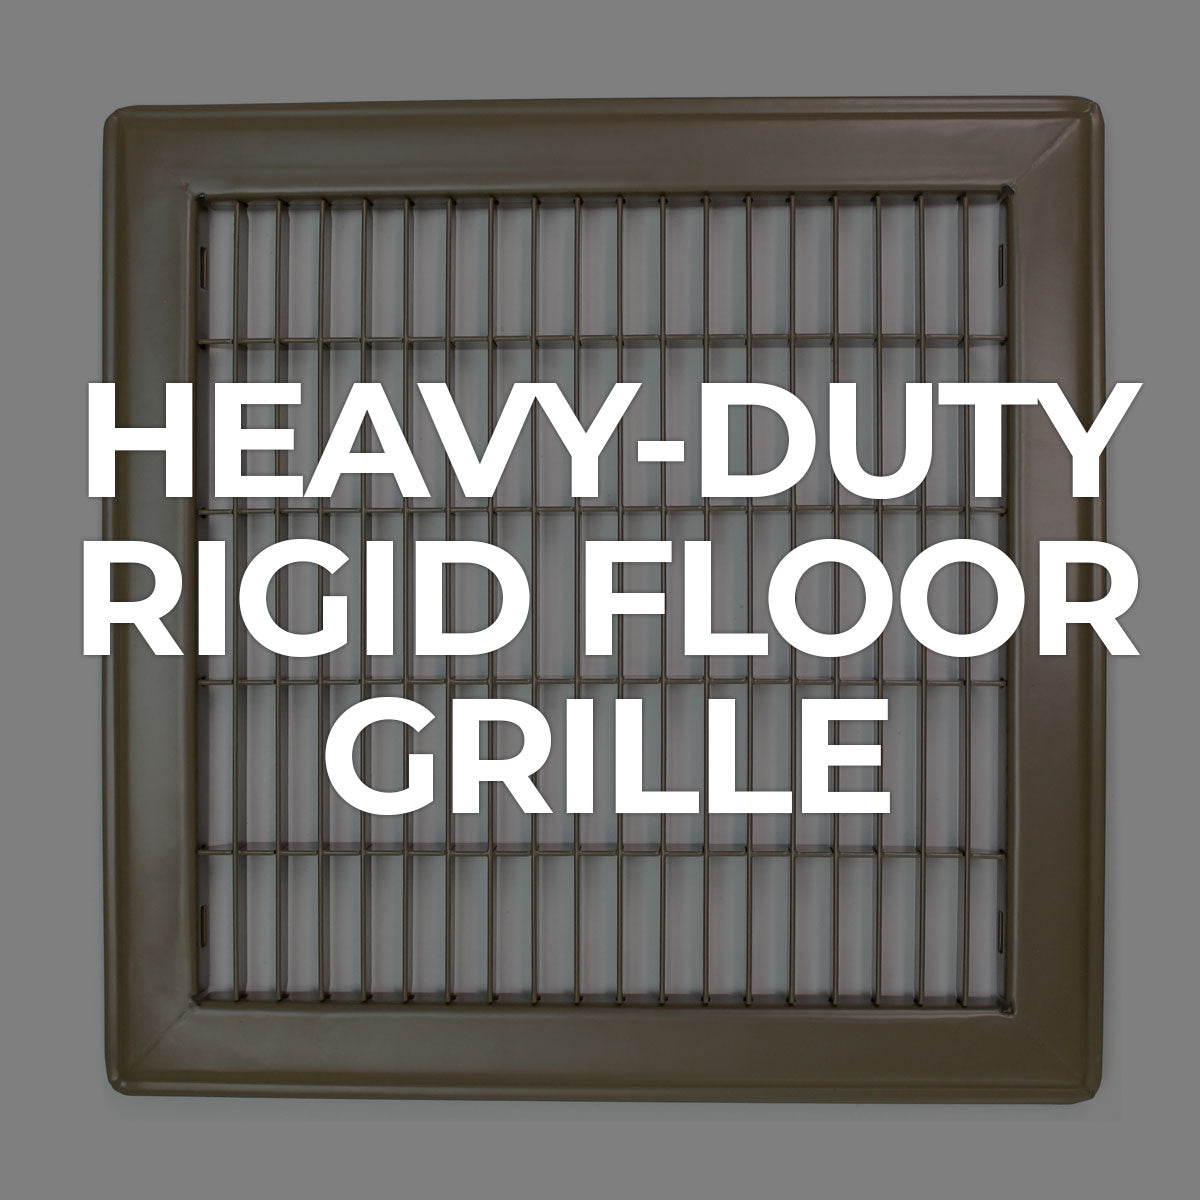 Search by Collections: Heavy-Duty Rigid Floor Grille